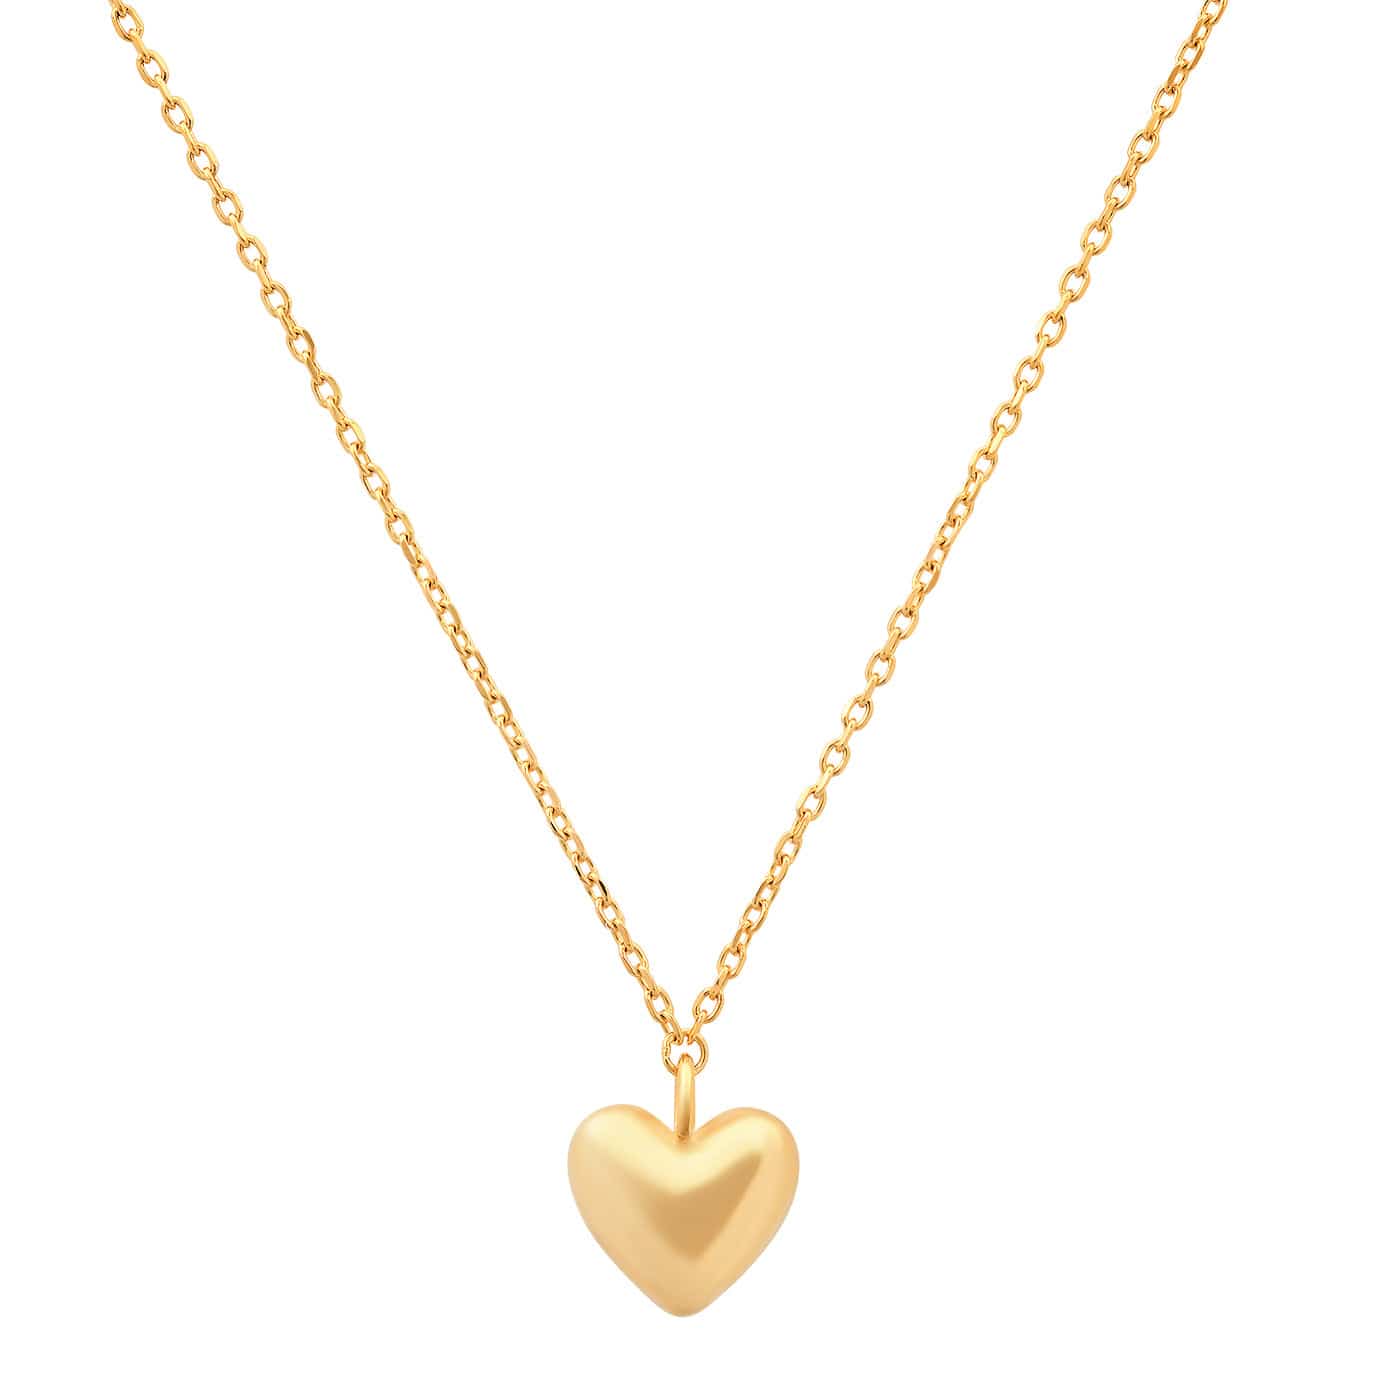 TAI JEWELRY | Gold Vermeil Puffed Heart Pendant Necklace